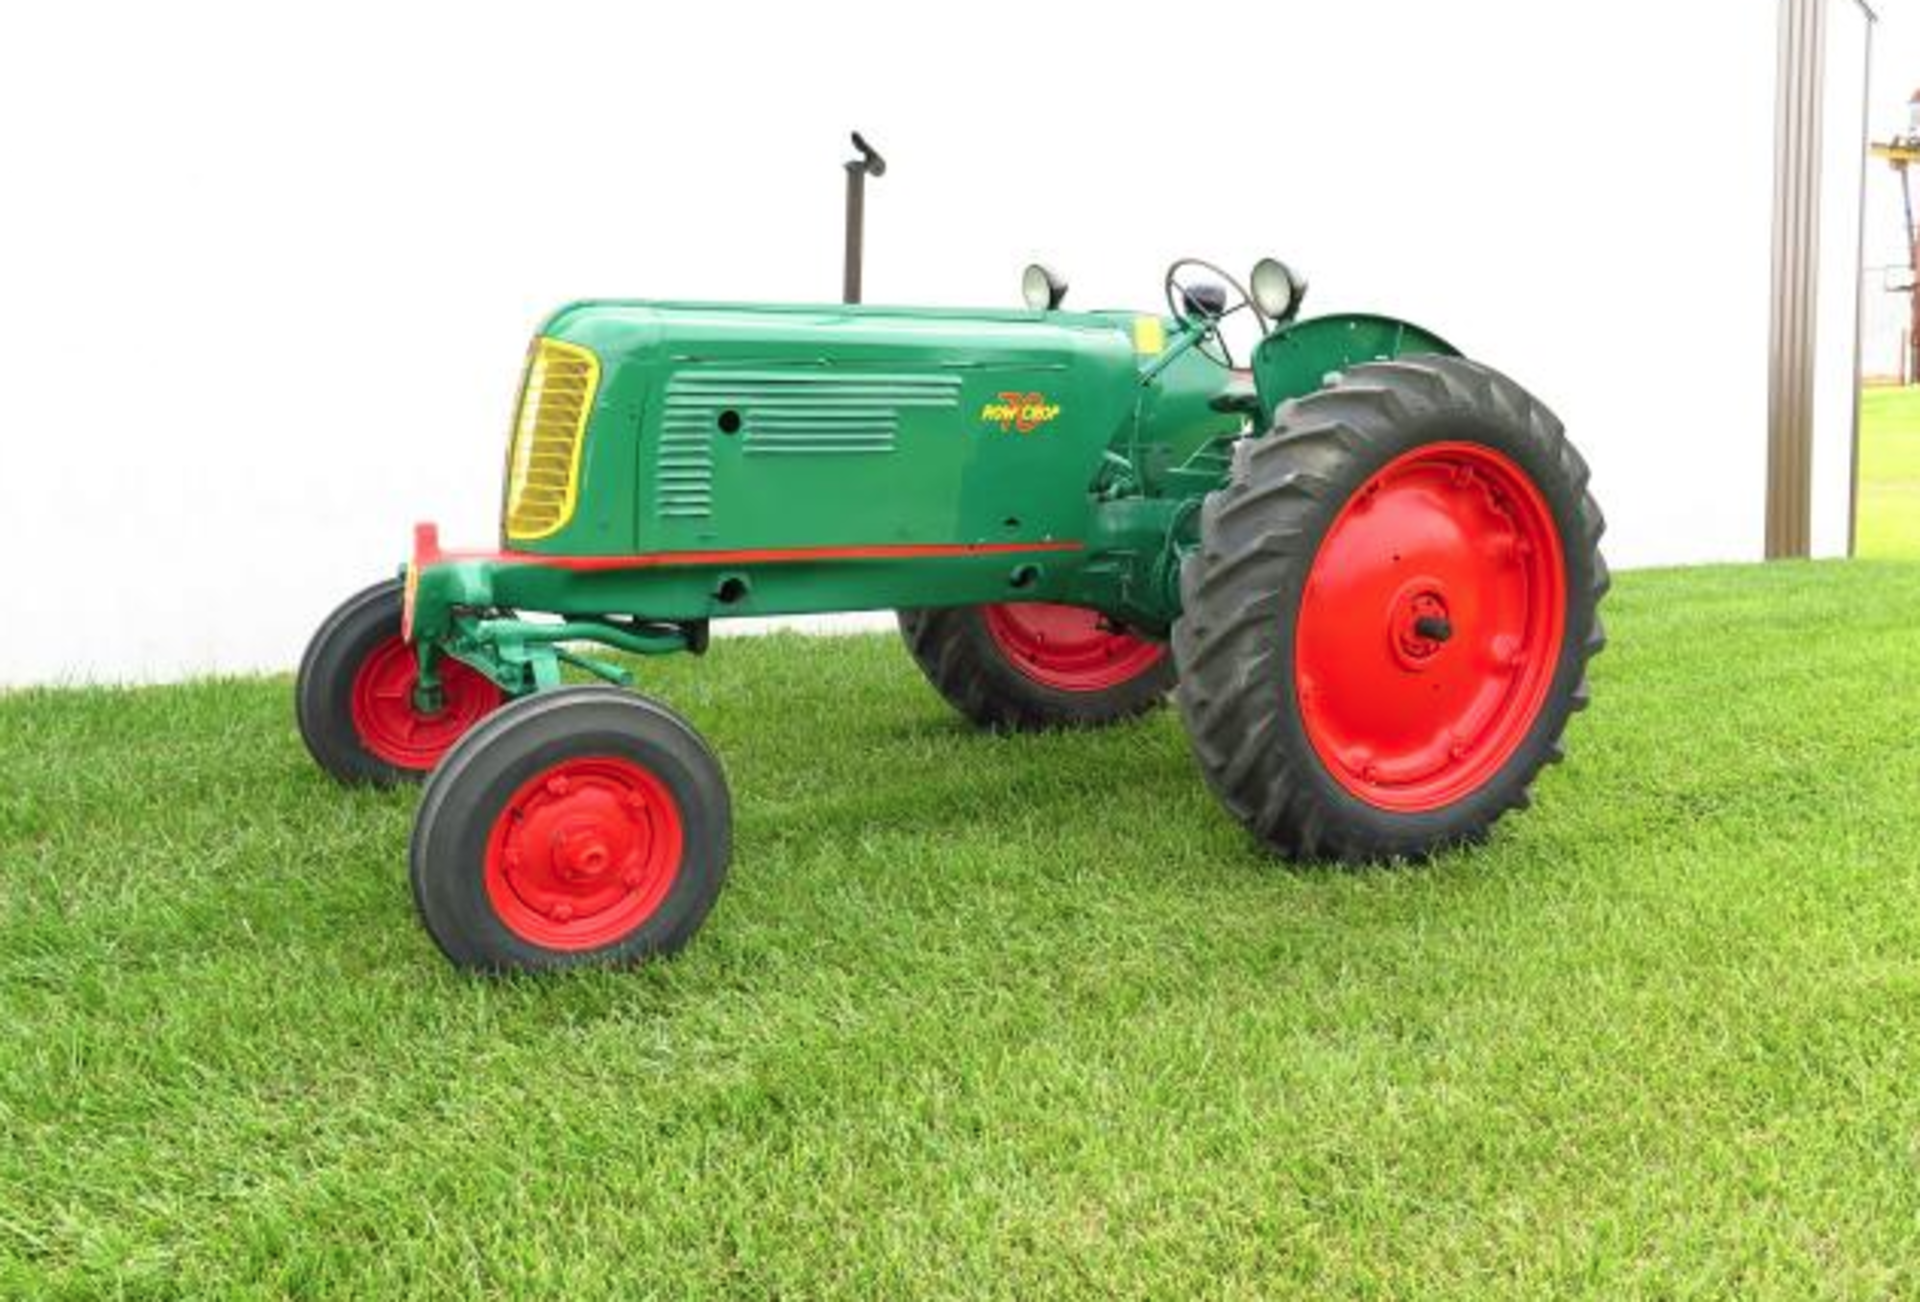 Full Catalog Coming! Estate Vehicle, Restored & Original Oliver Tractor Collection & Parts - Image 2 of 6